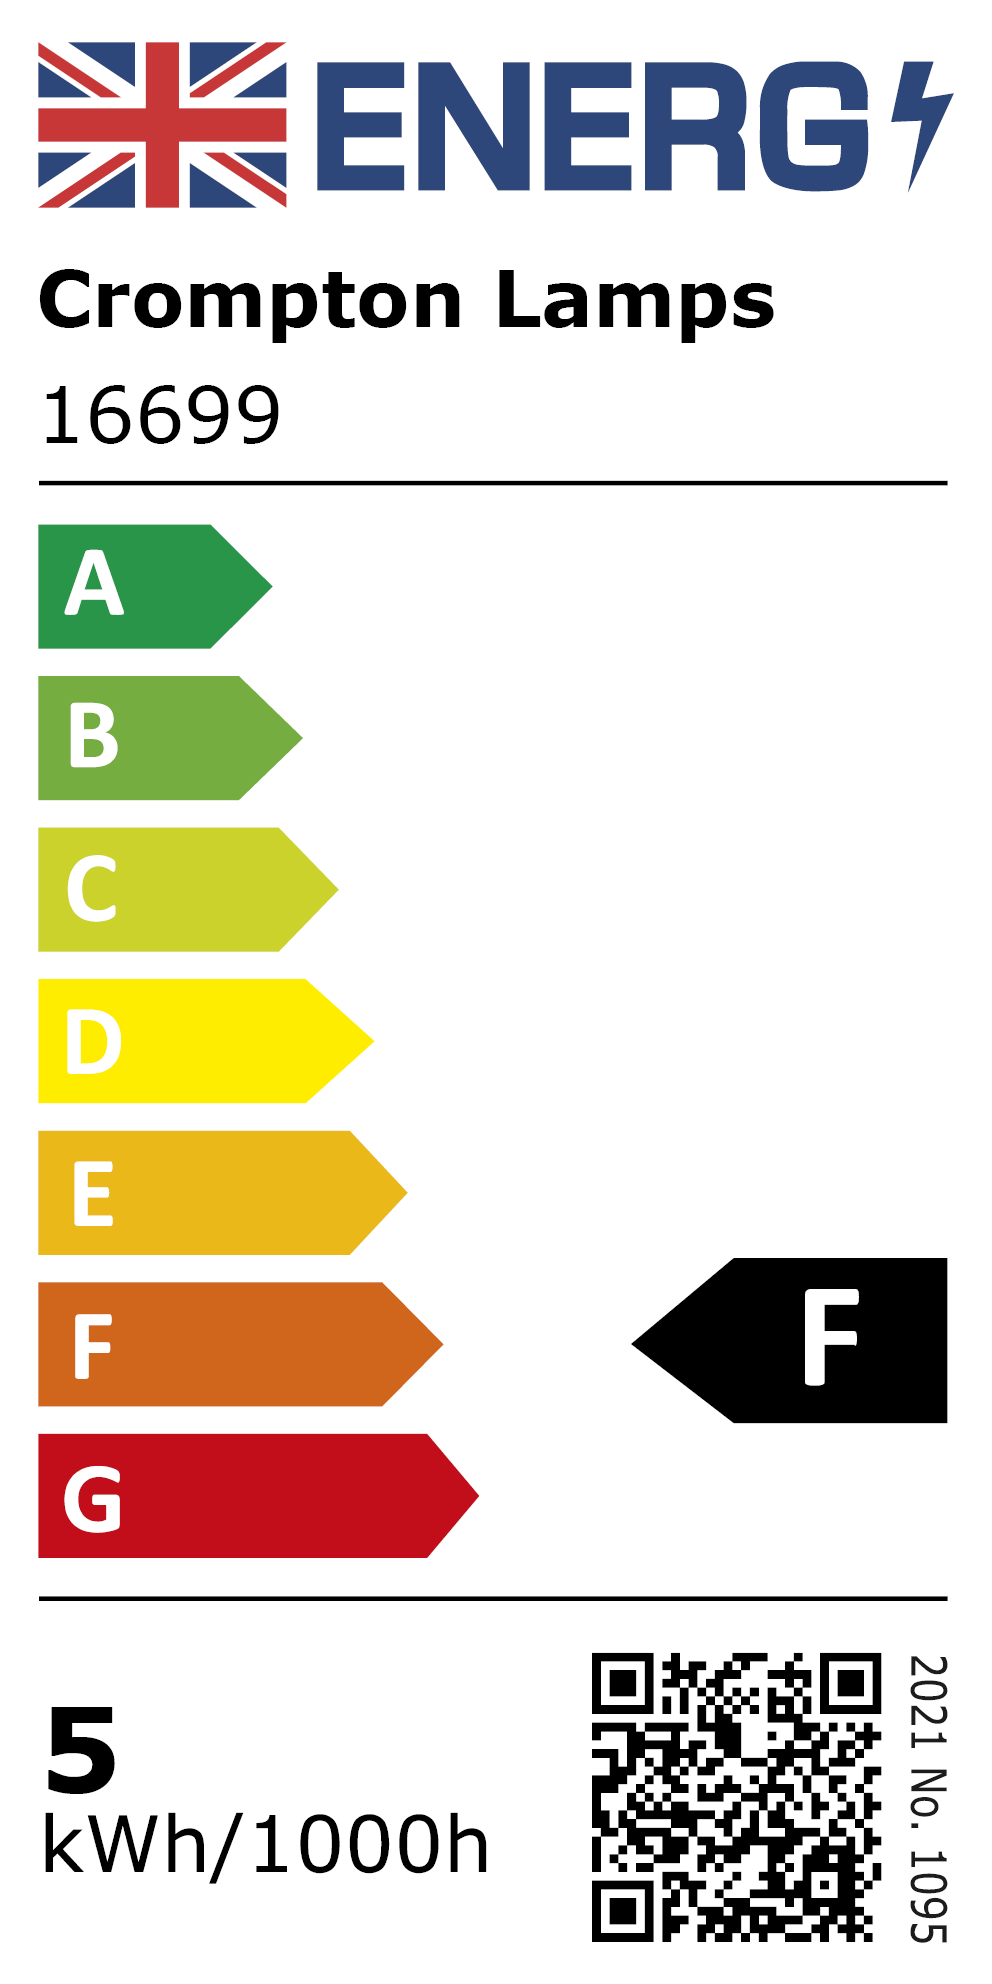 New 2021 Energy Rating Label: MPN 16699